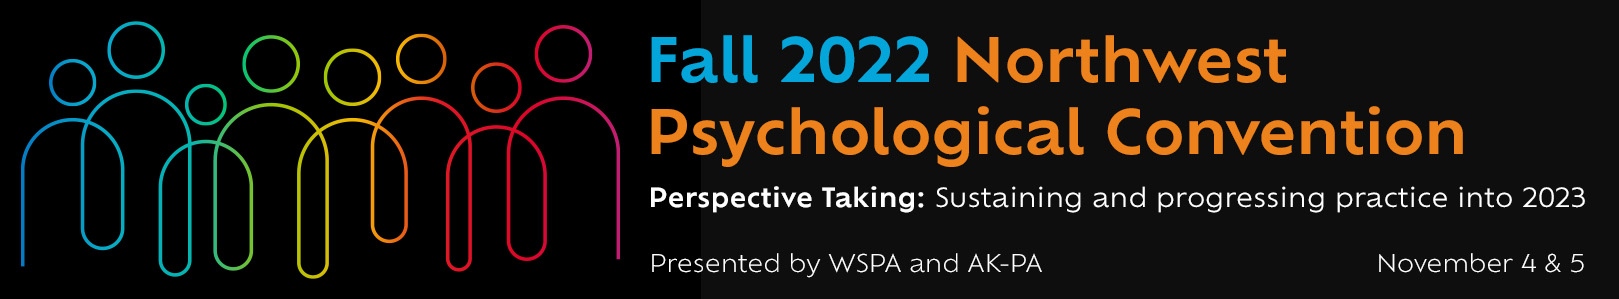 Join us at the Fall 2022 Northwest Psychological Convention.